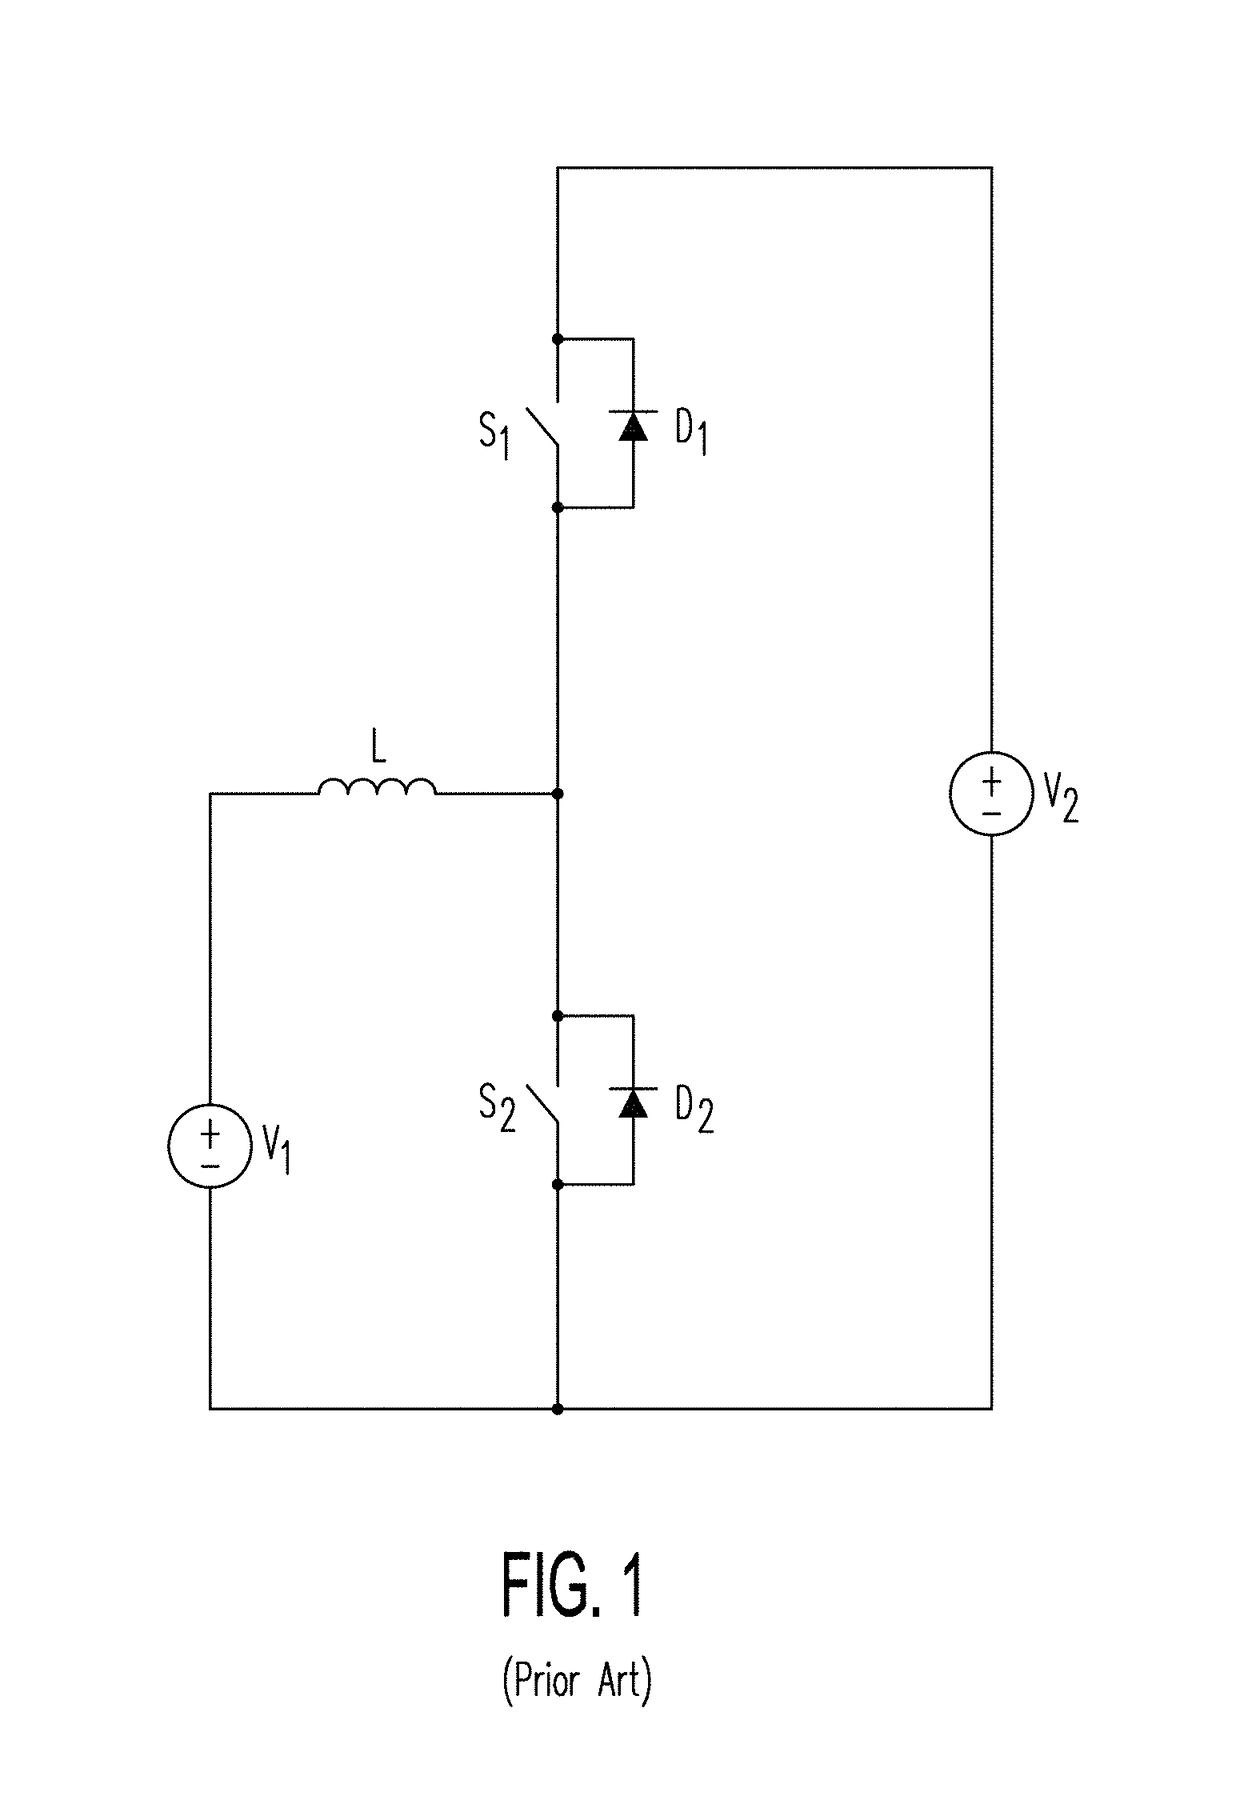 Soft-switched bidirectional buck-boost converters